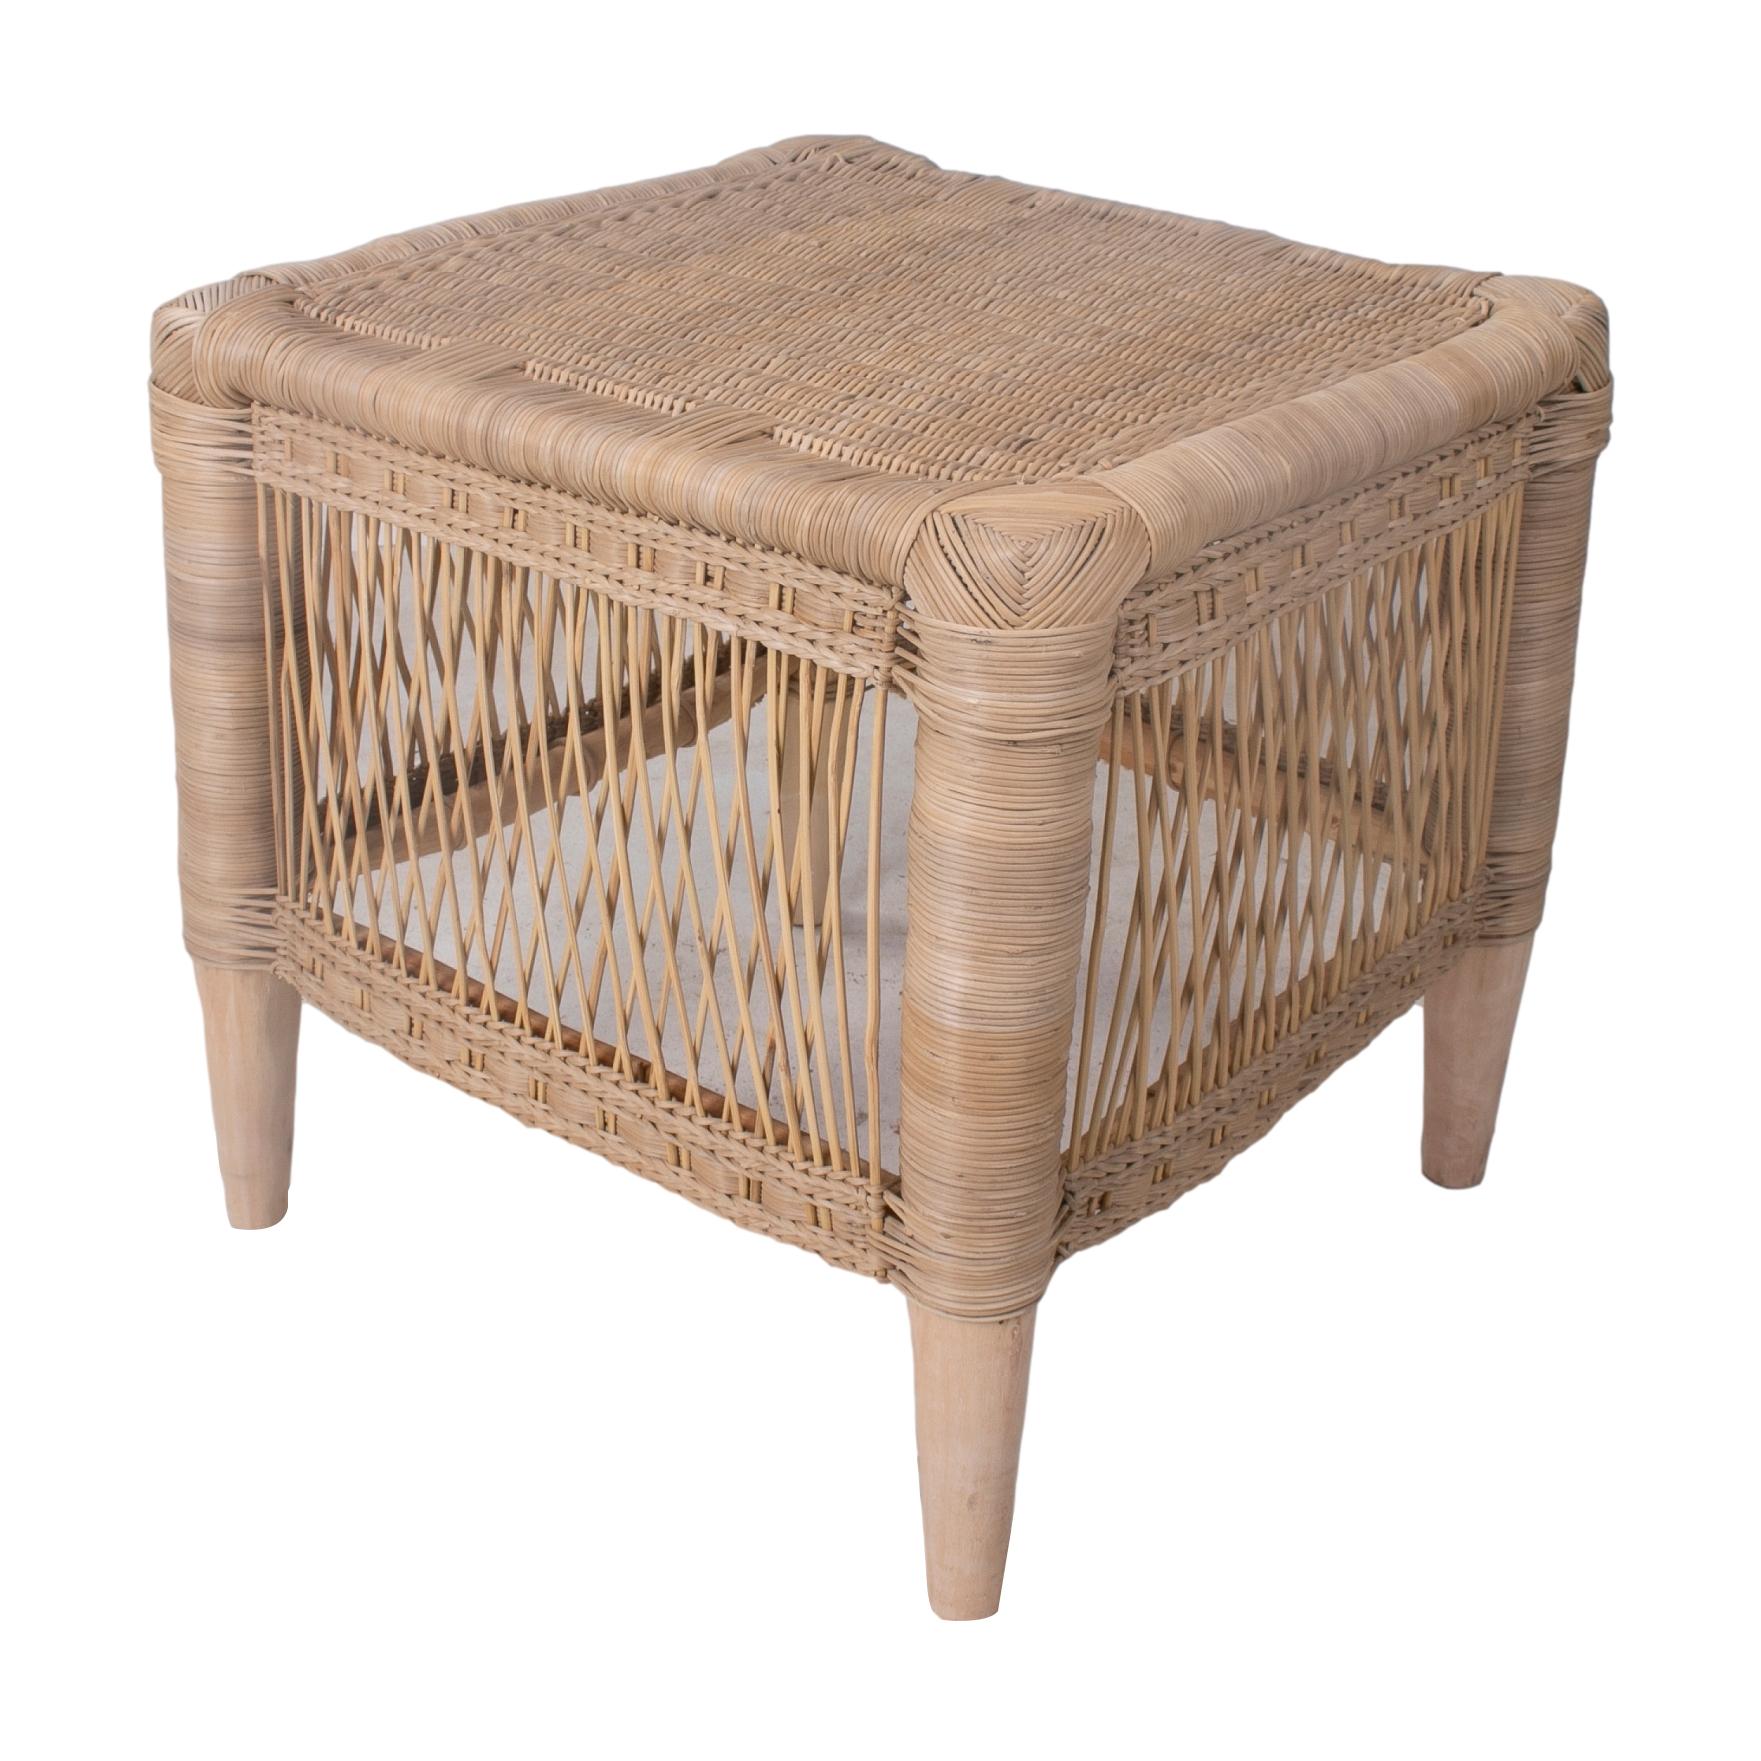 Spanish pair of hand woven rattan low stools.